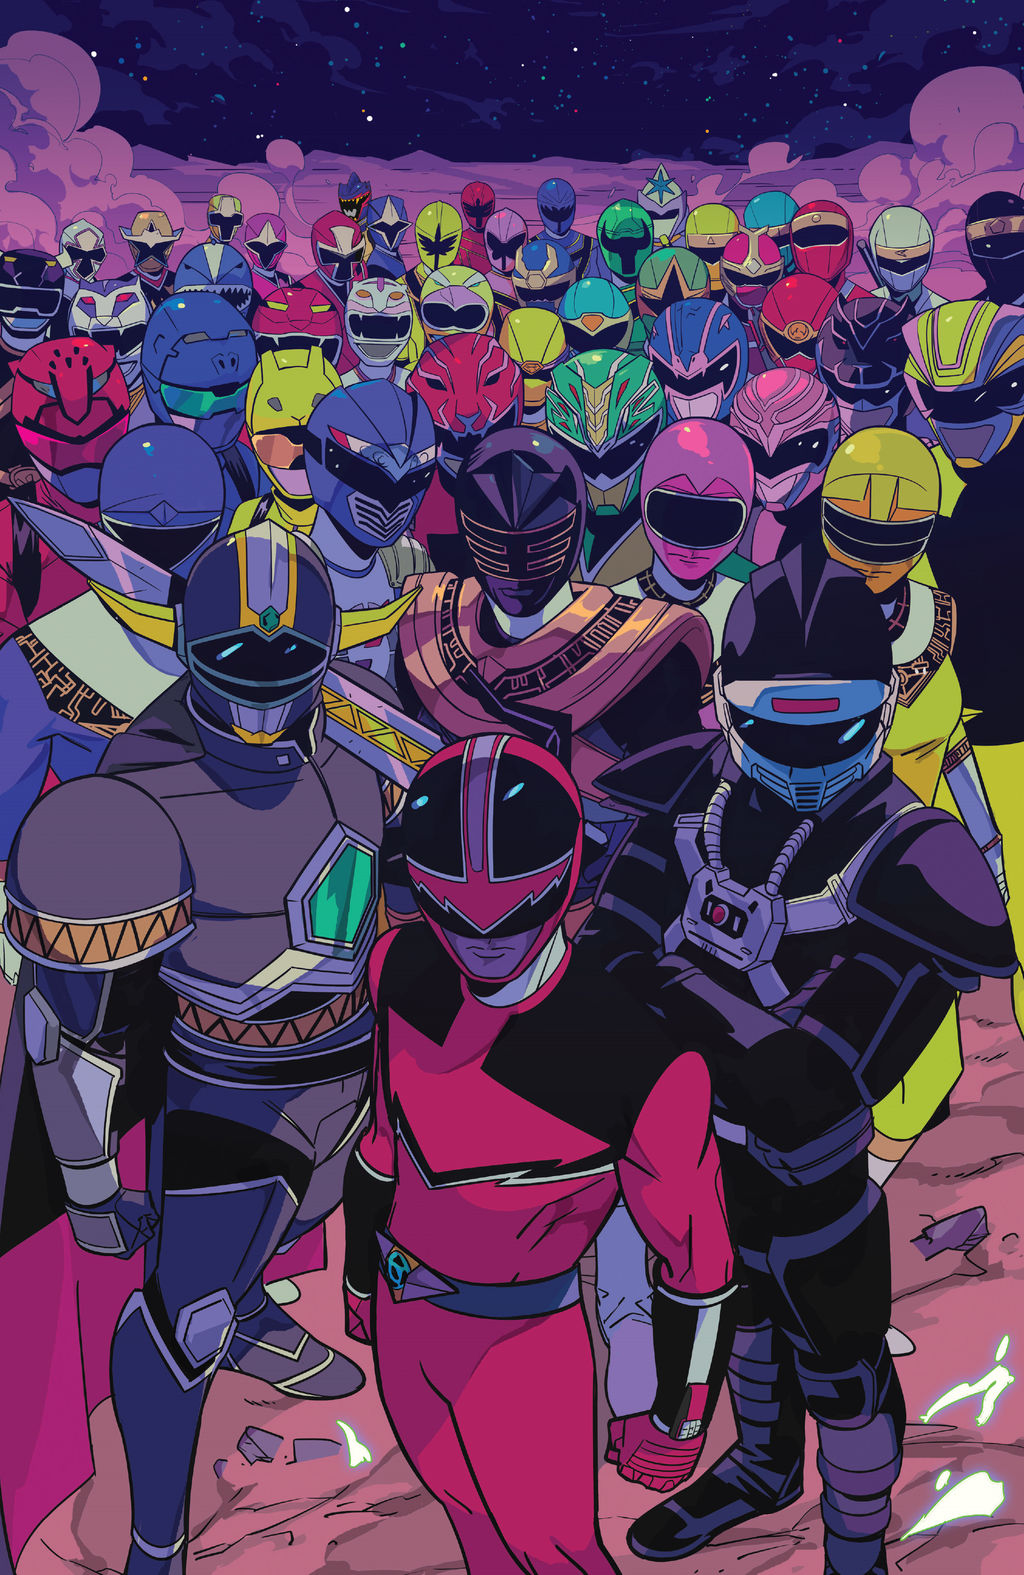 Fan Creates Anime Intro For Power Rangers: Shattered Grid